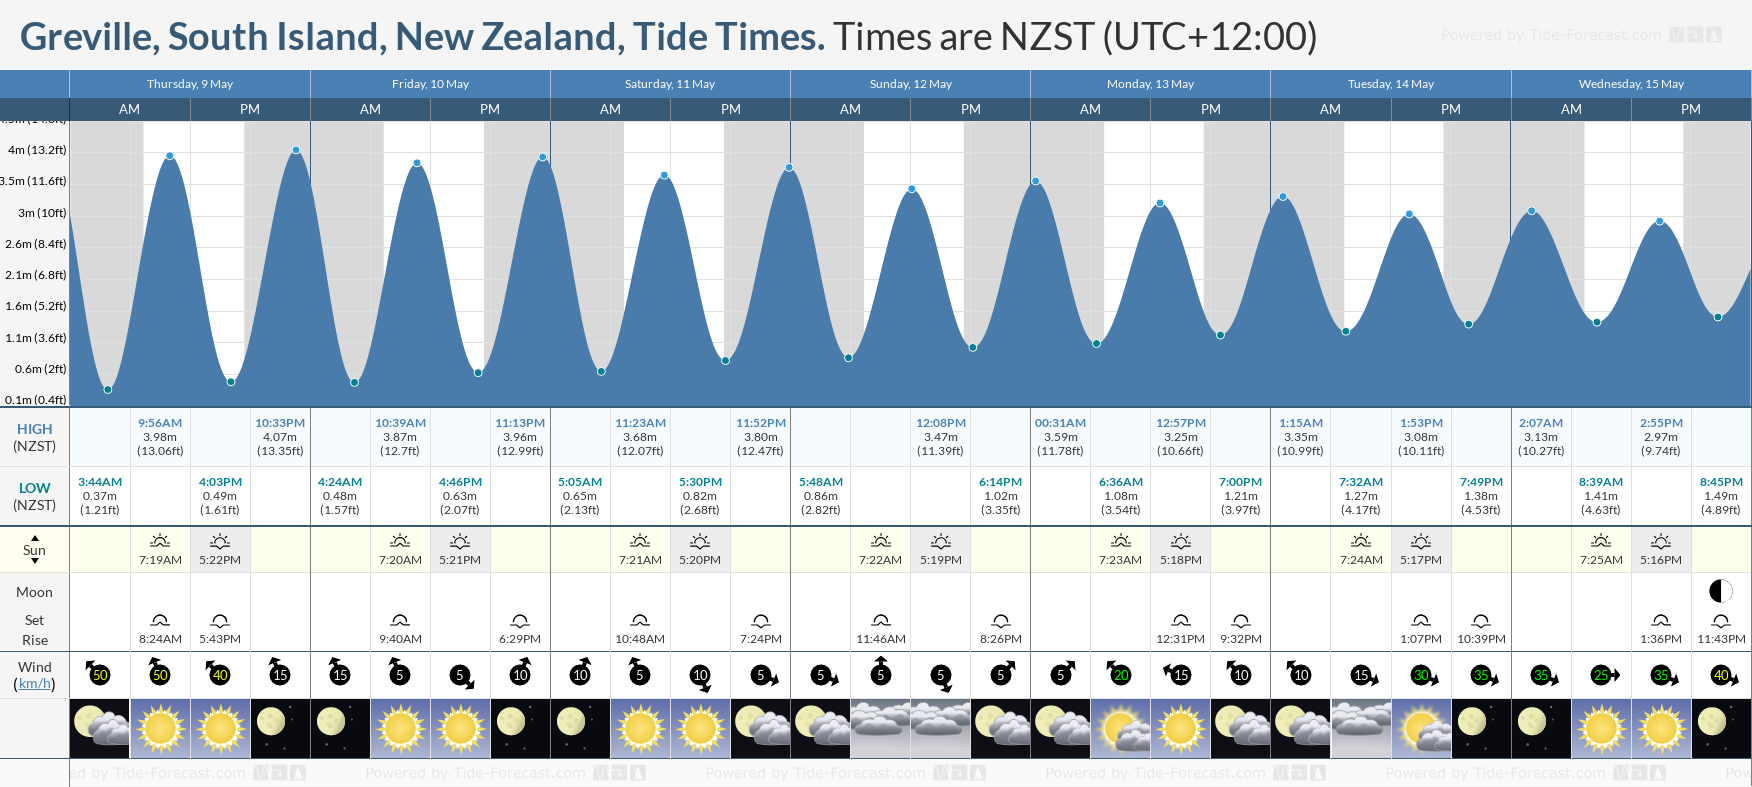 Greville, South Island, New Zealand Tide Chart including high and low tide tide times for the next 7 days